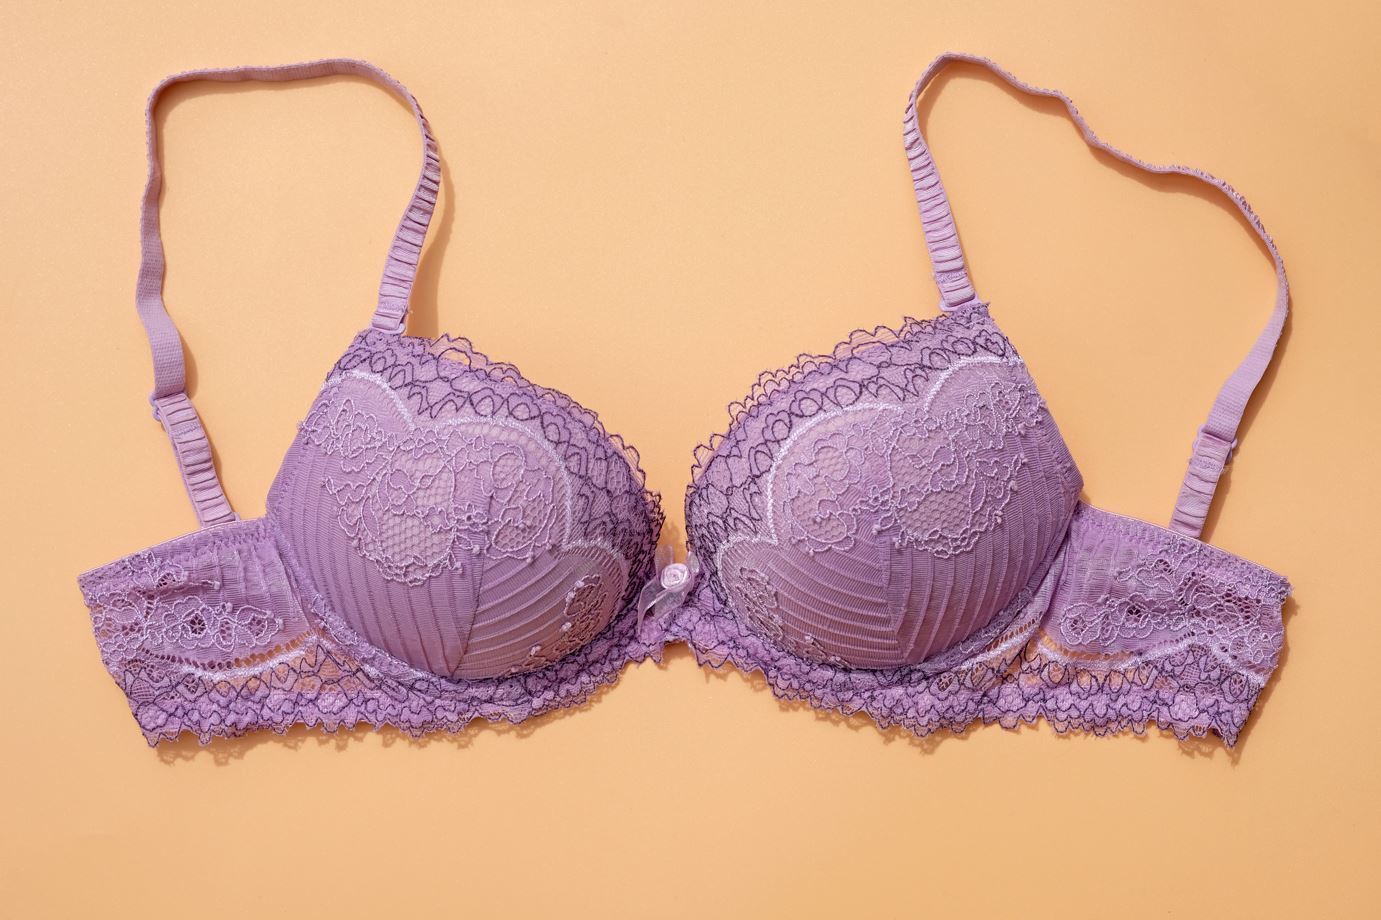 Why do flat-chested girls wear bras or bikinis? - Quora